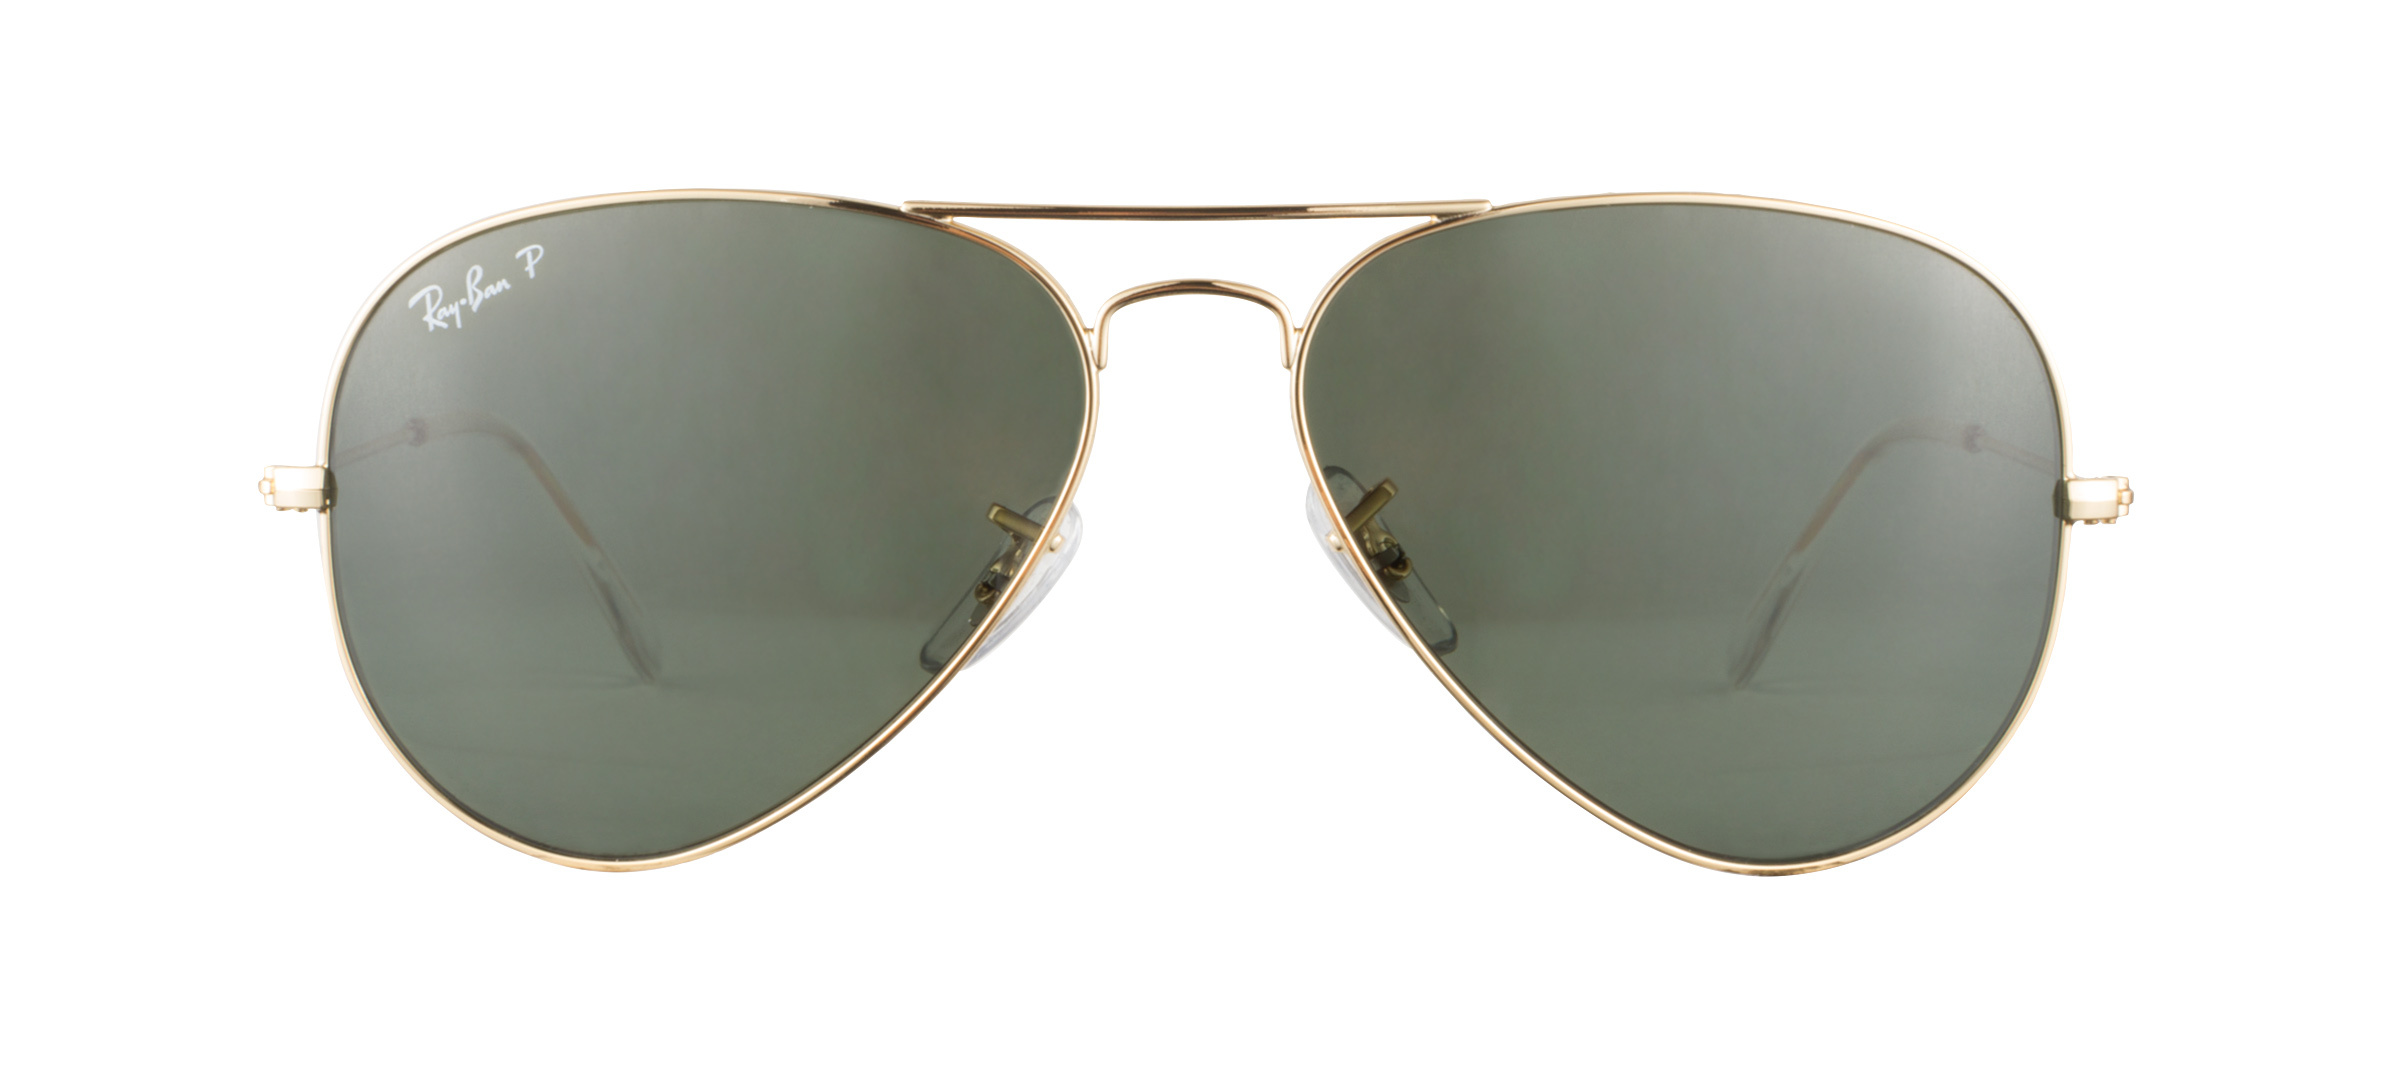 Ray-Ban Sunglasses | Clearly Canada